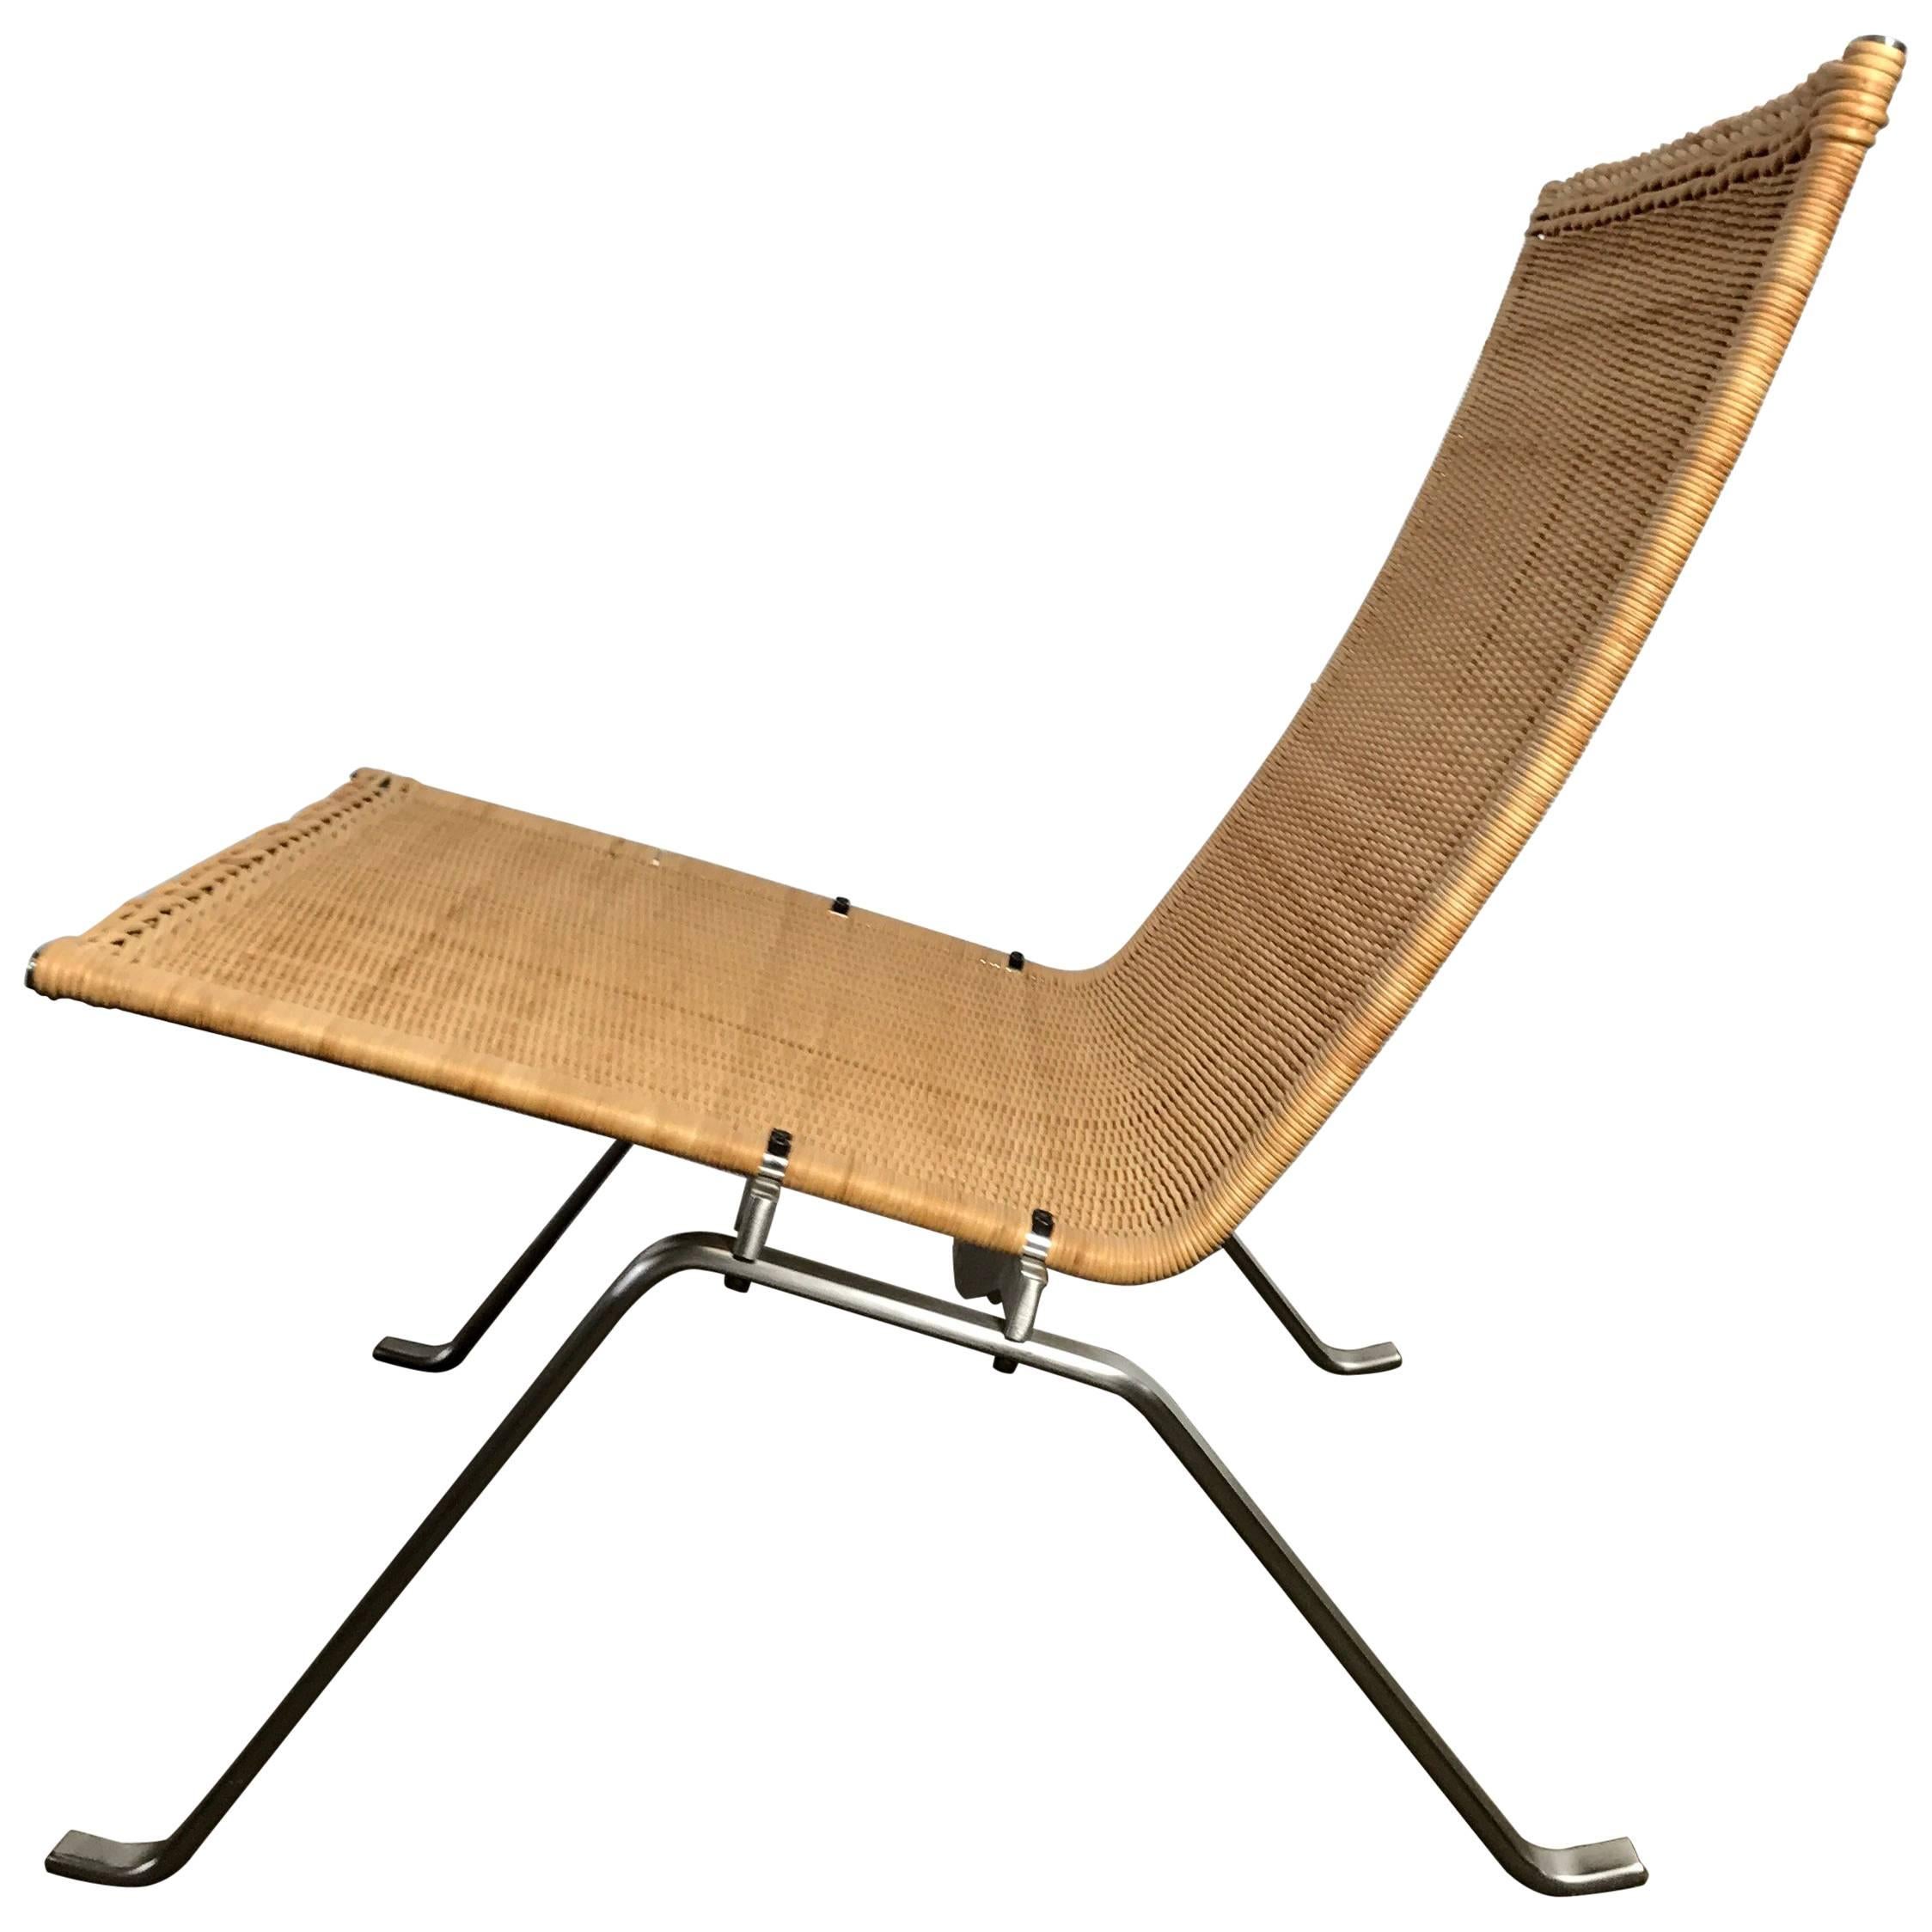 Poul Kjaerholm PK 22 Wicker and Stainless Lounge Chair